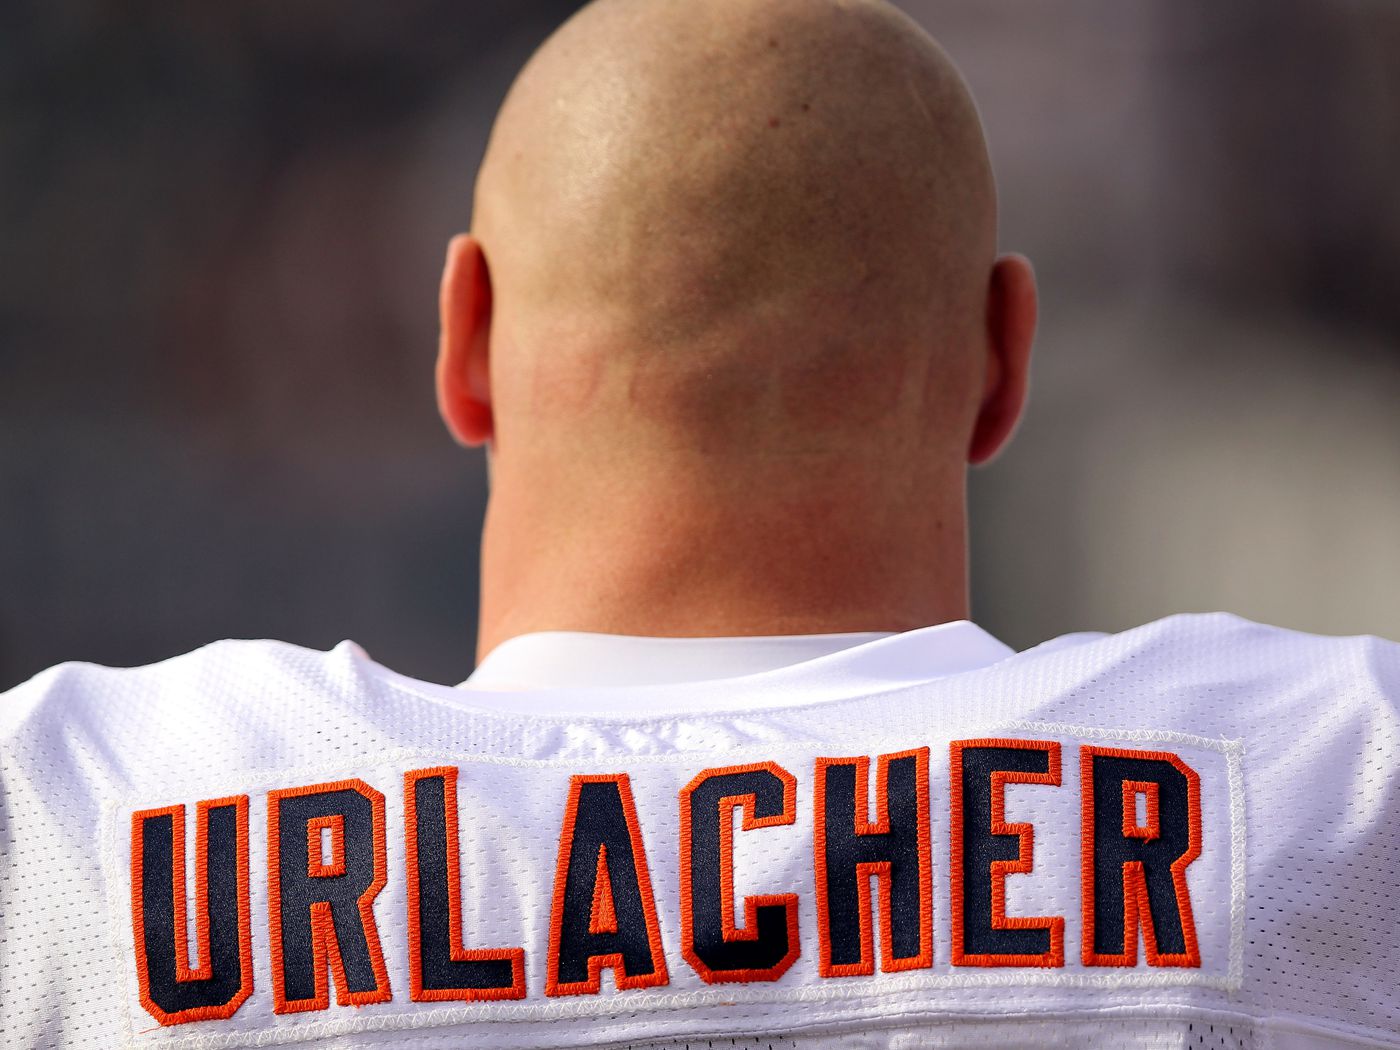 Brian Urlacher Announcers Retirement from the NFL - Dawgs By Nature